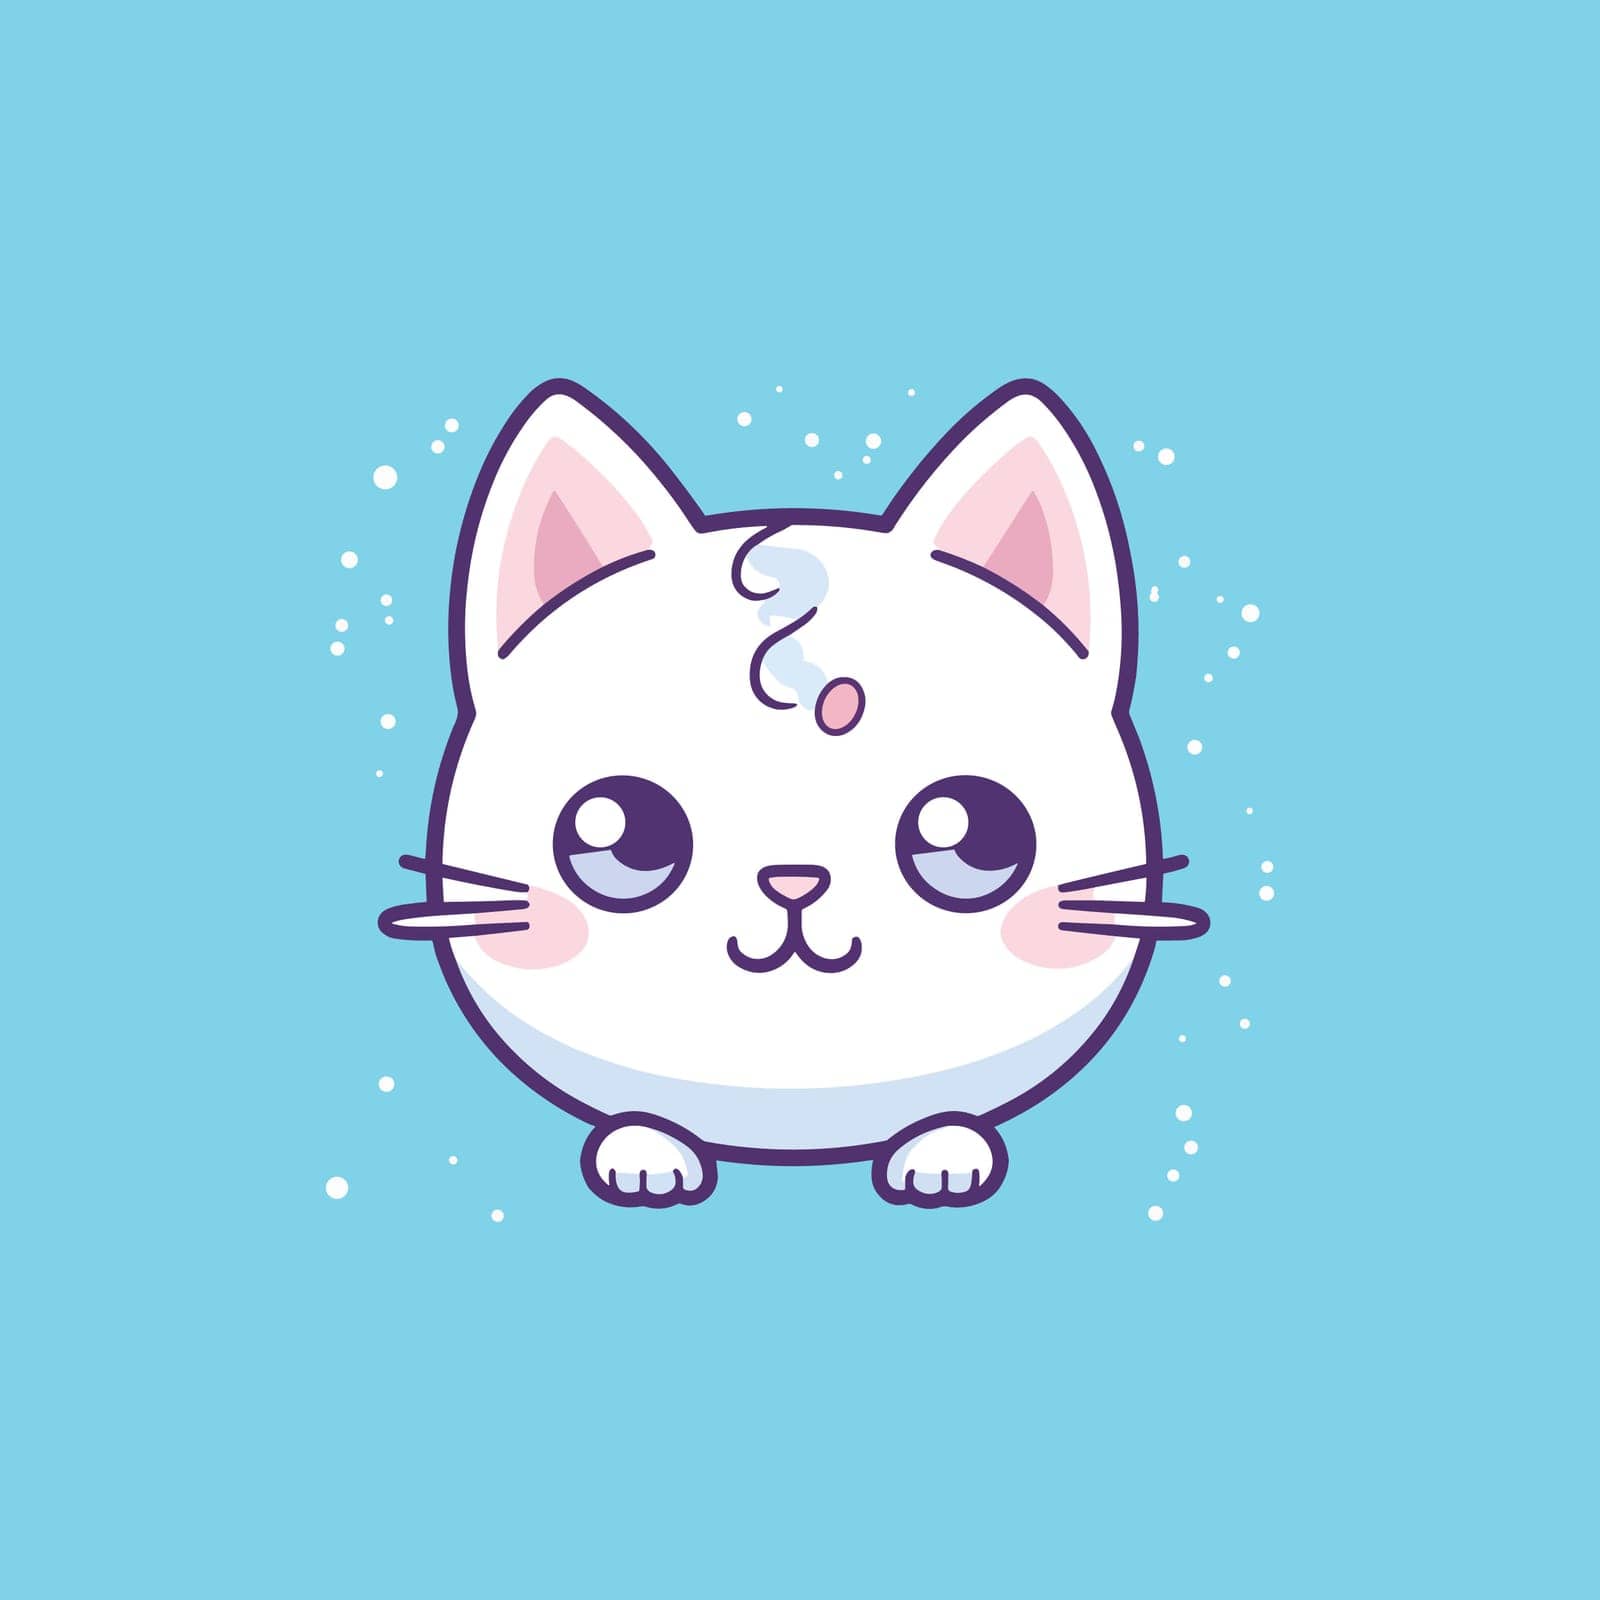 Cute cat face vector design with kawaii style by Vinhsino